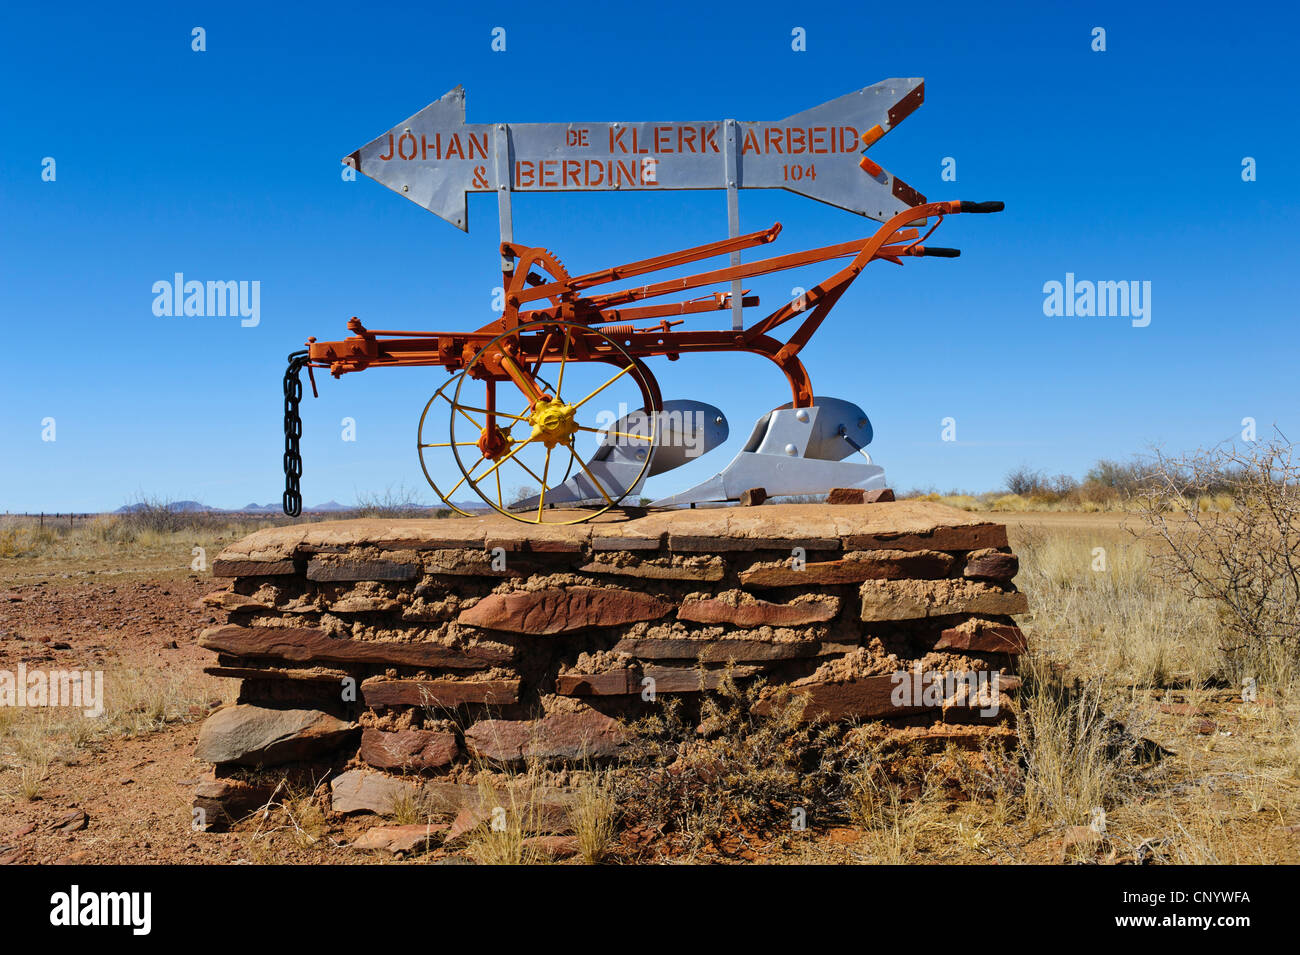 Name sign on an old fashioned plow at the entrance of a farm near Keetmanshoop. Namakwaland, Namibia. Stock Photo